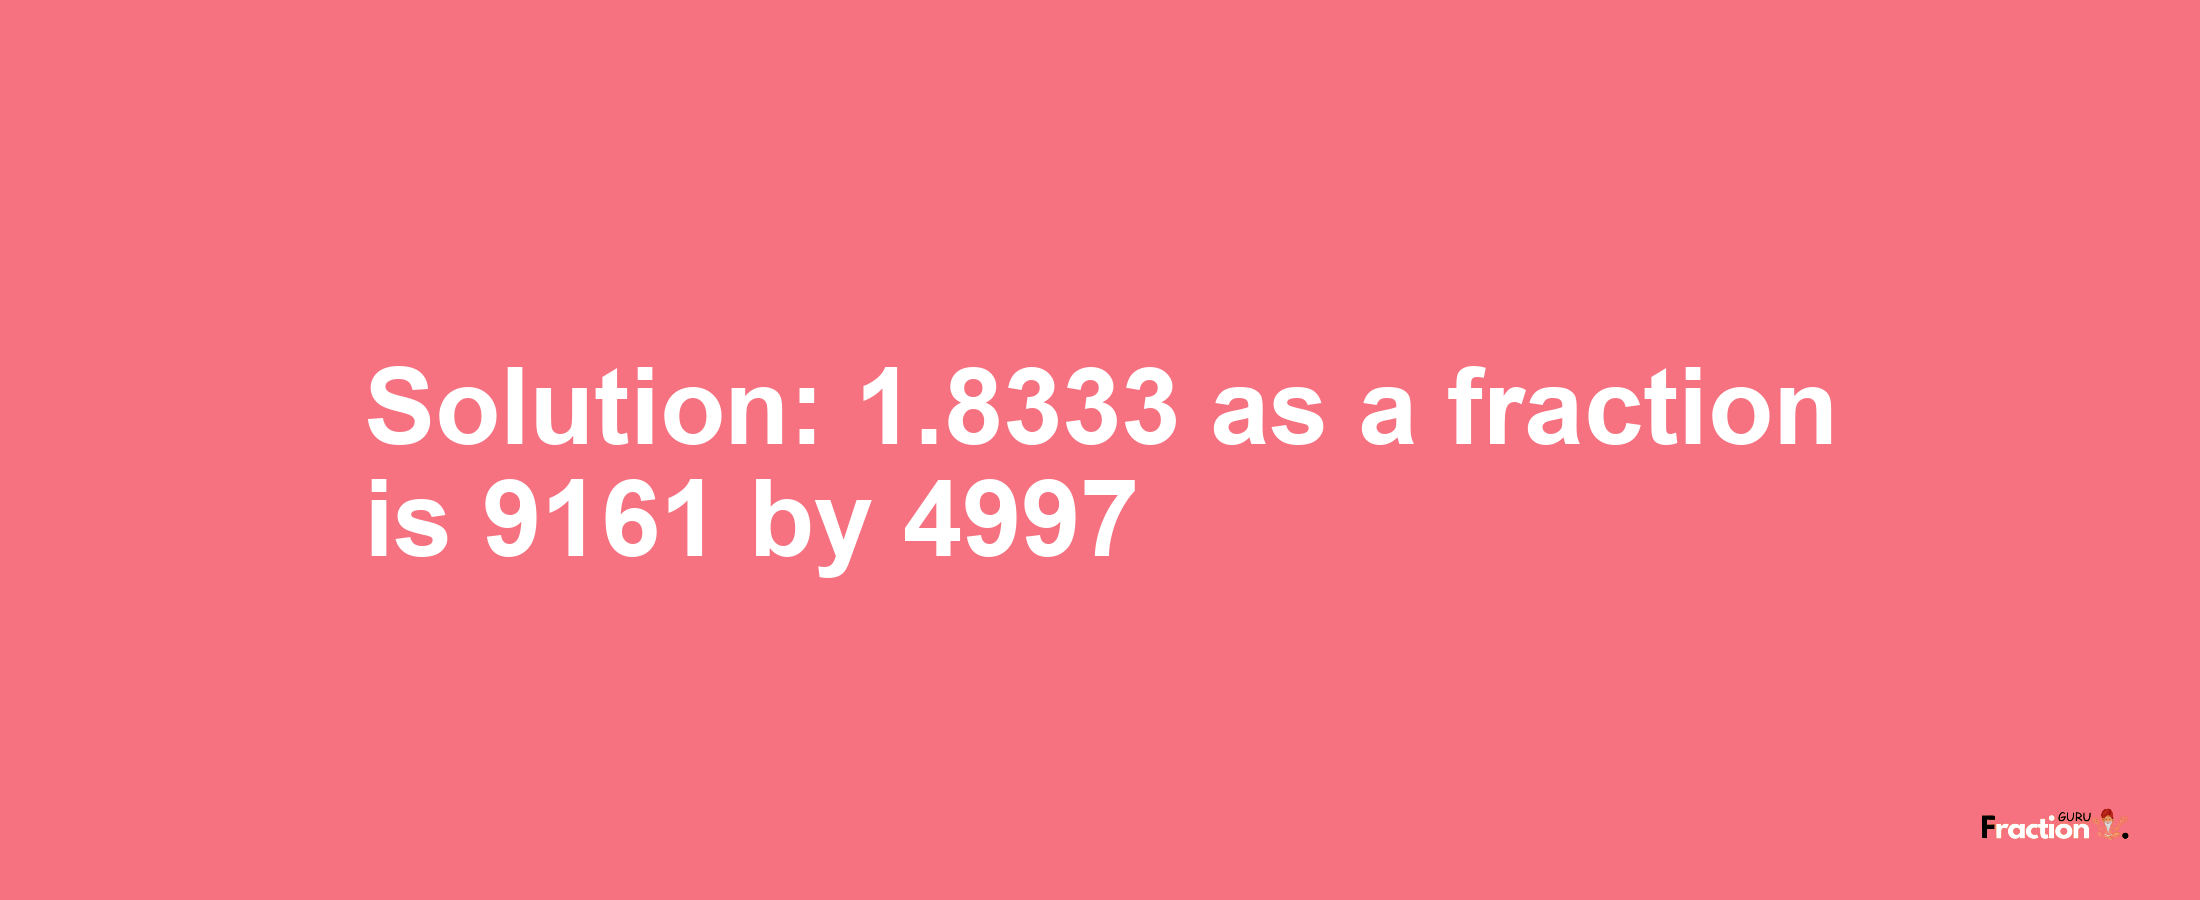 Solution:1.8333 as a fraction is 9161/4997